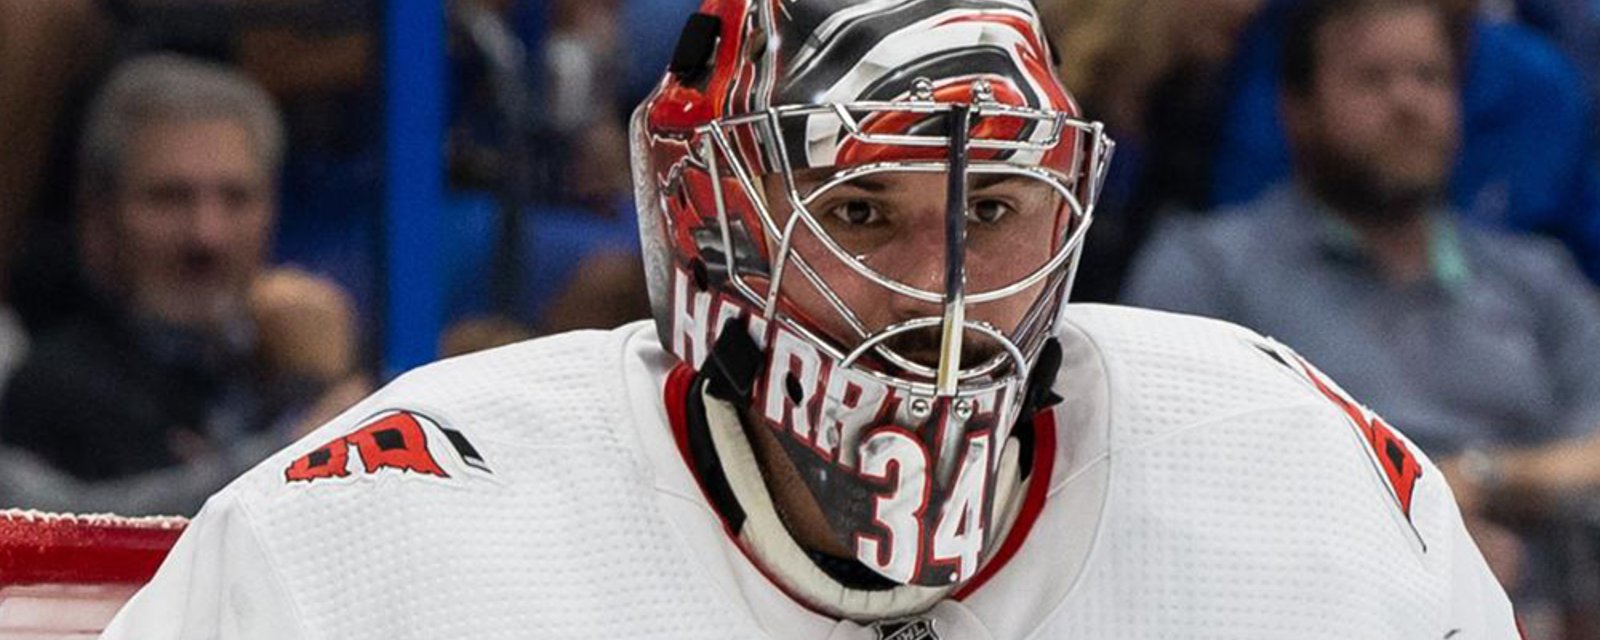 Petr Mrazek honors past Czech Maple Leafs players with second mask reveal 